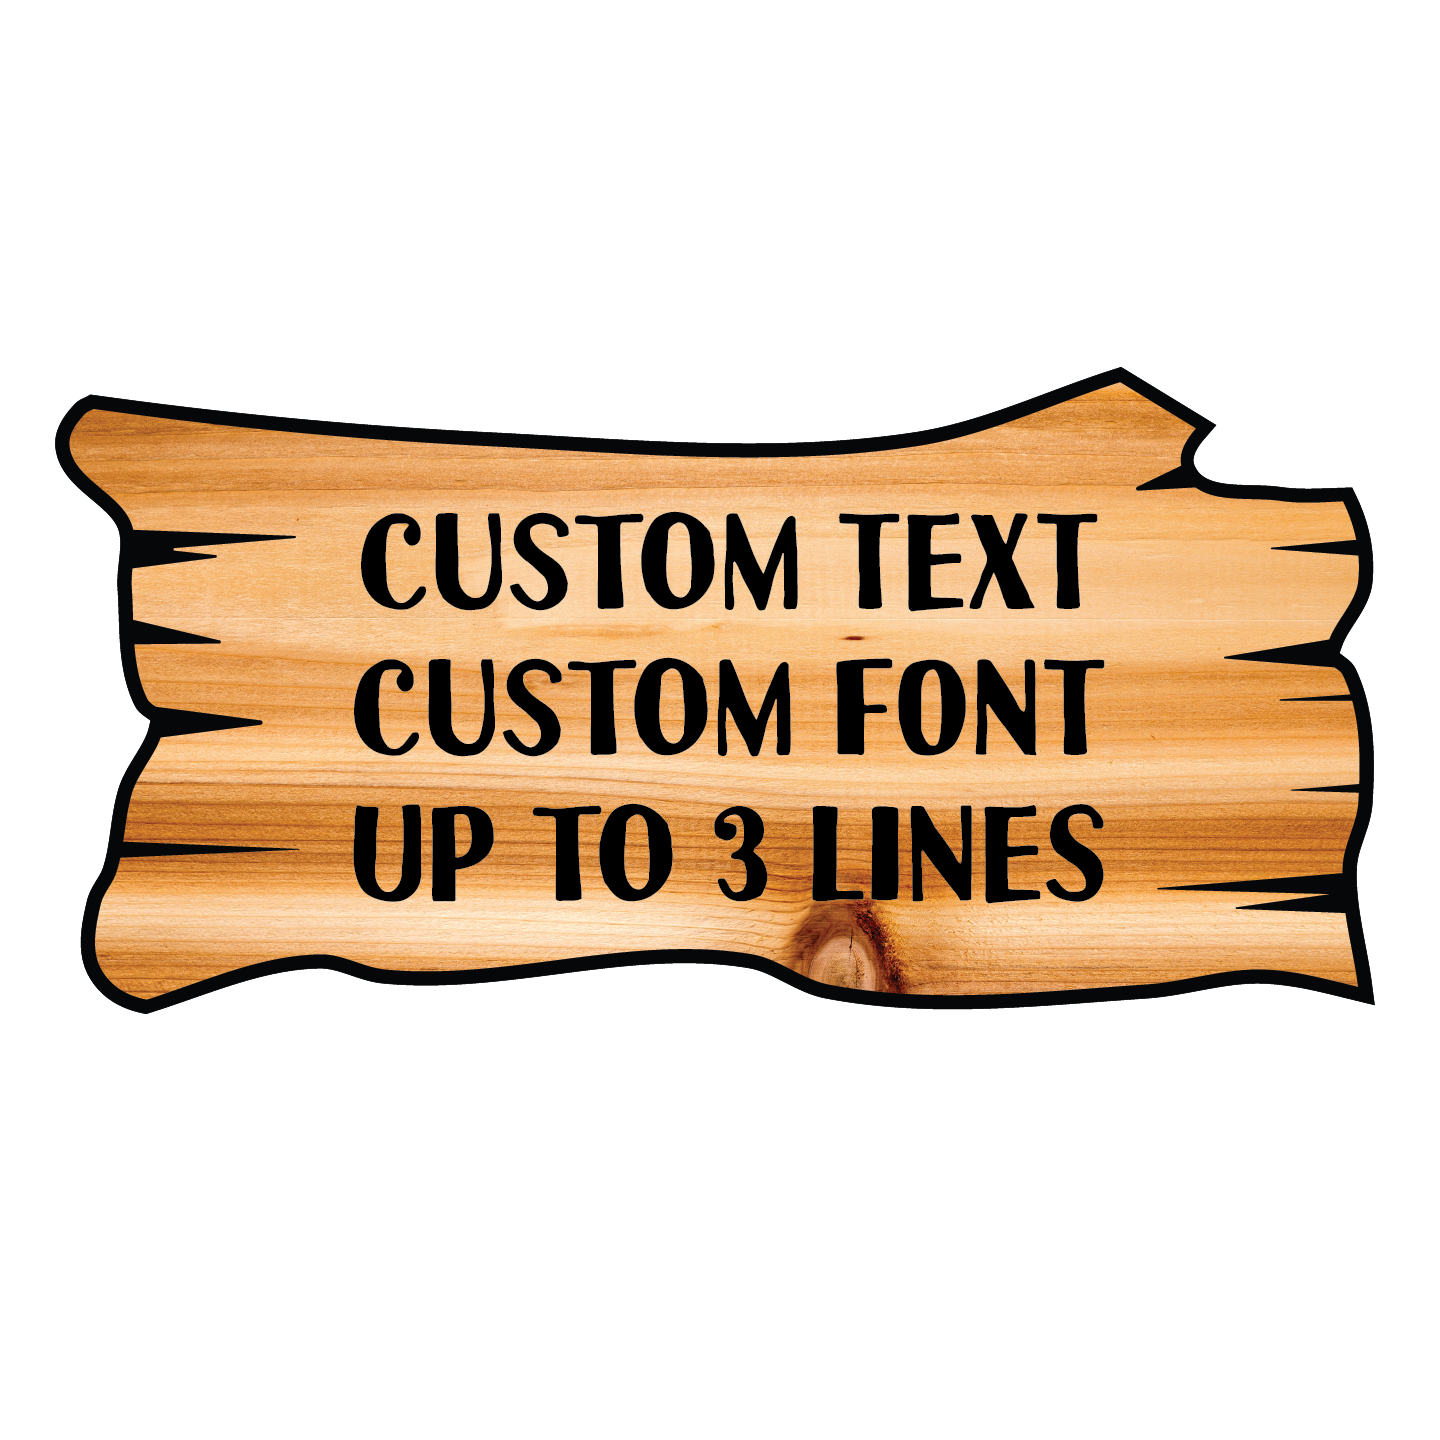 Rustic Log-Shaped Wooden Sign With Custom Text